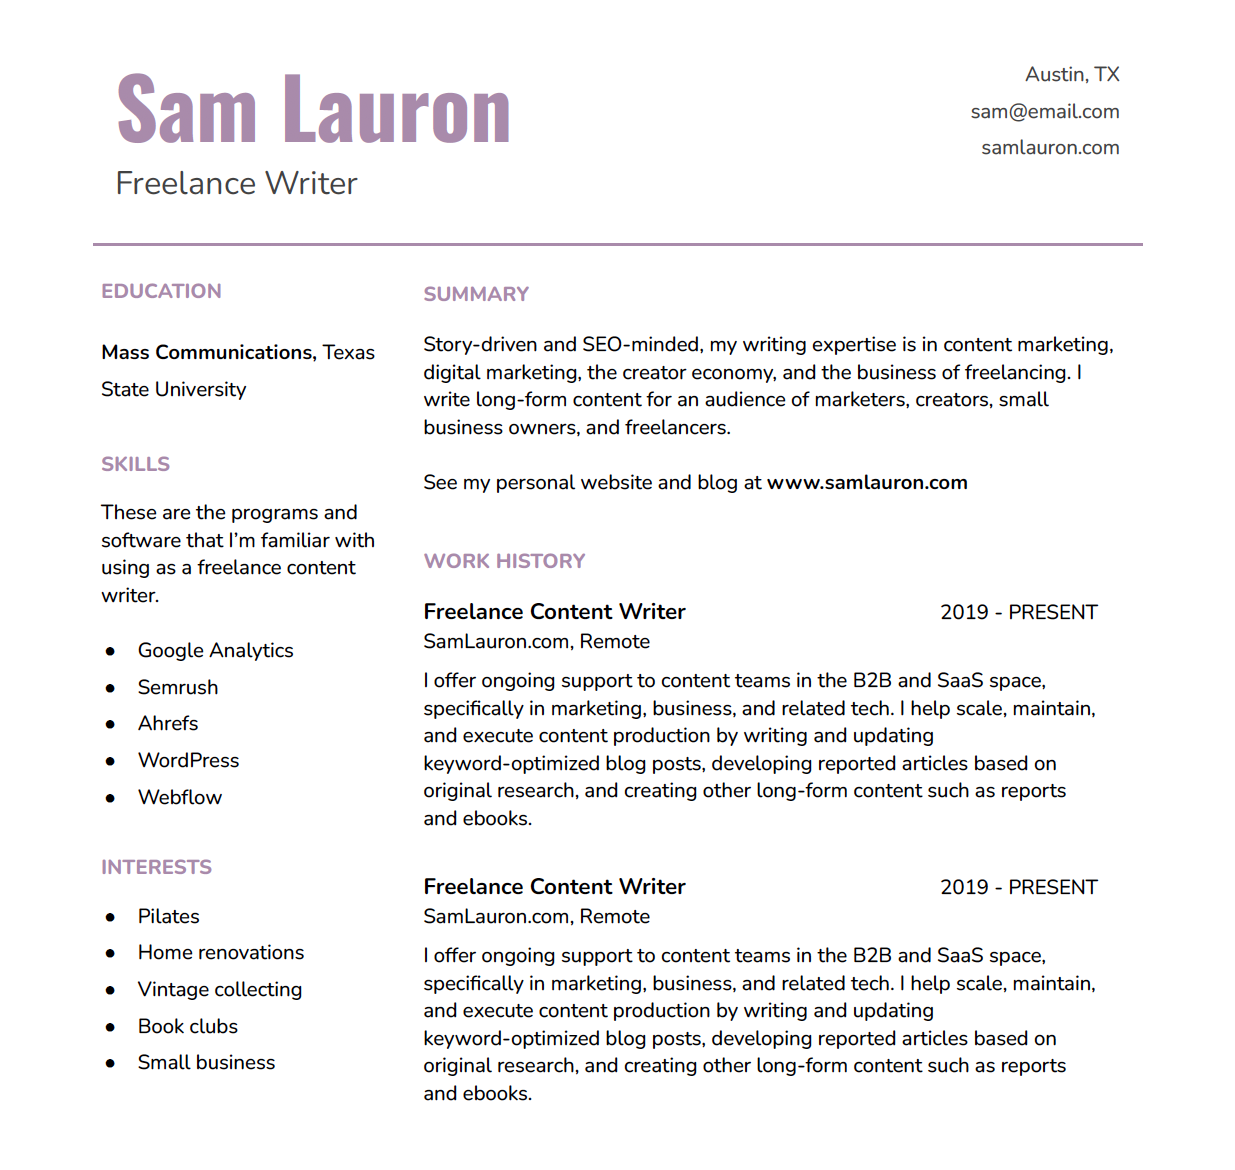 Interests on resume examples: A preview of my resume that includes hobbies and interests.